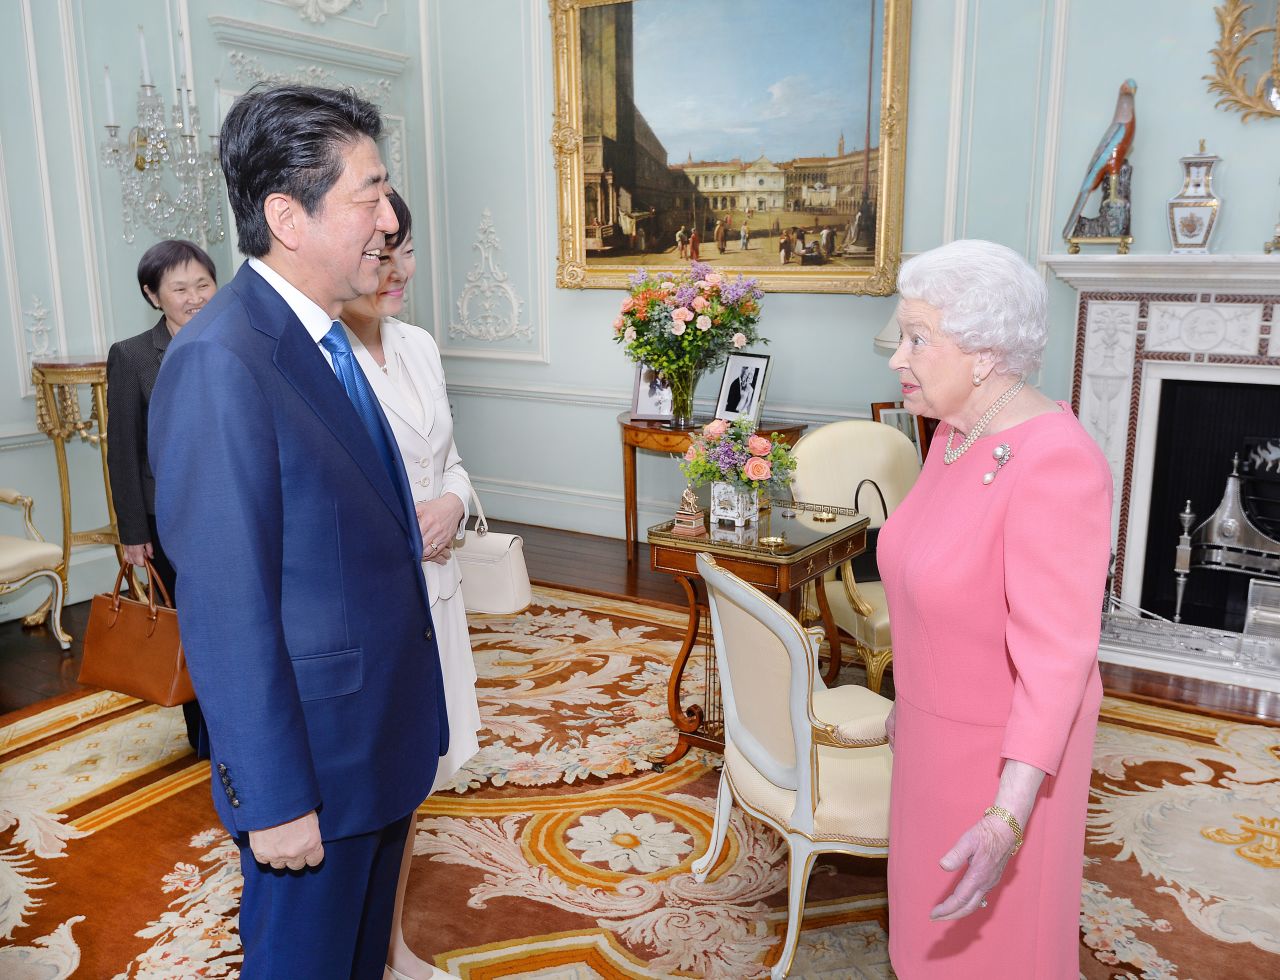 Abe and his wife, Akie, visit Britain's Queen Elizabeth II at Buckingham Palace in 2016.